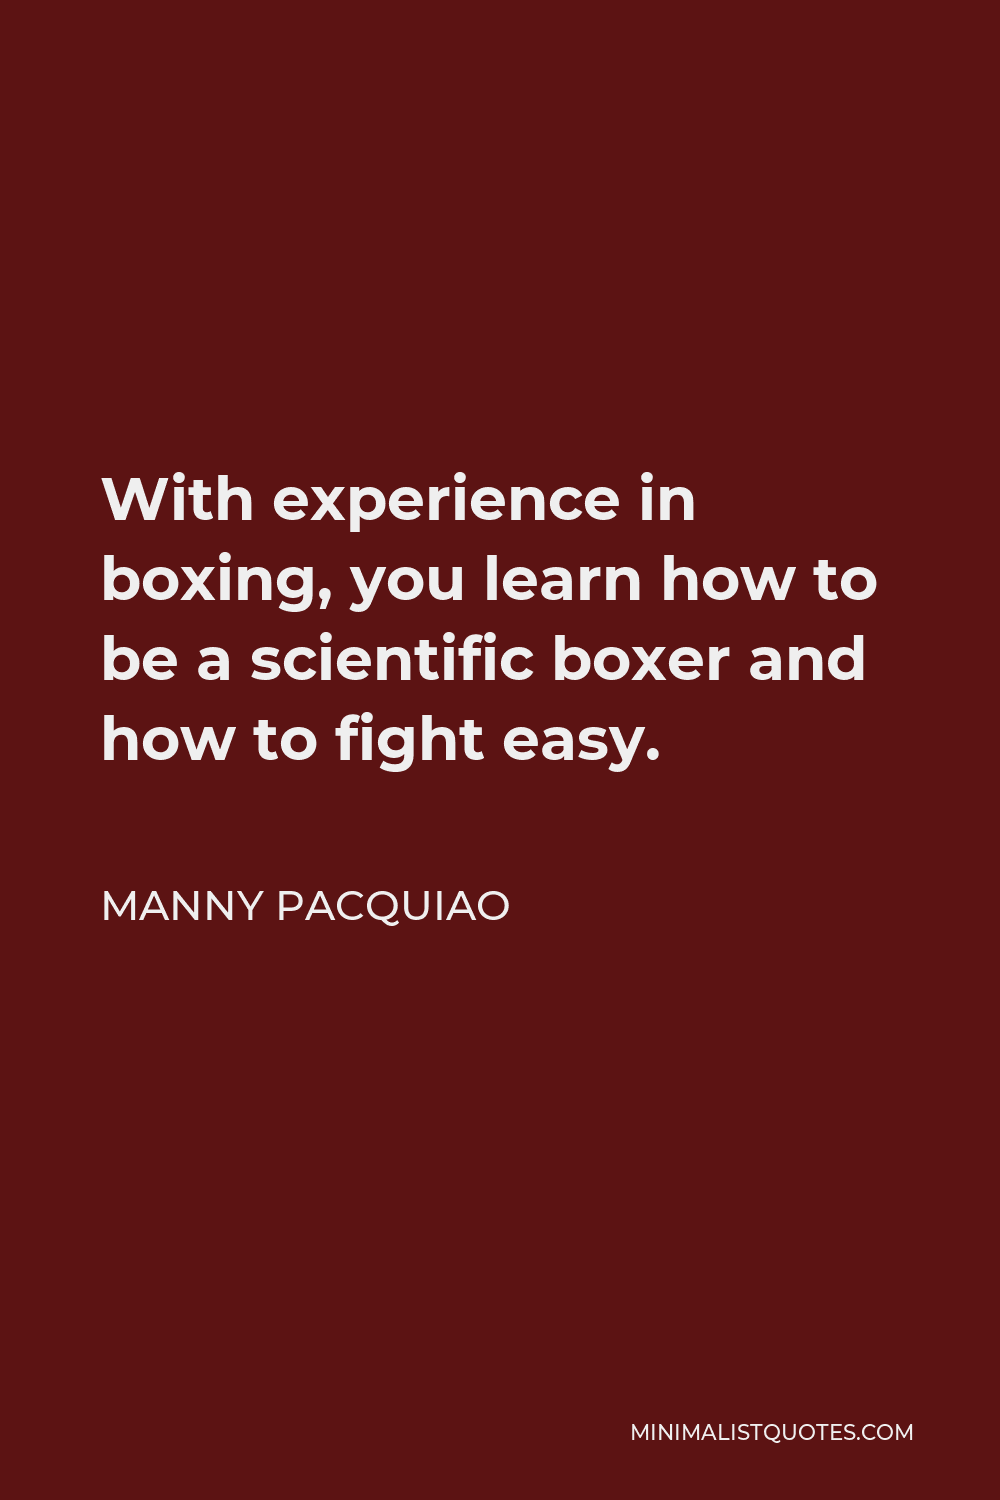 Manny Pacquiao Quote - With experience in boxing, you learn how to be a scientific boxer and how to fight easy.